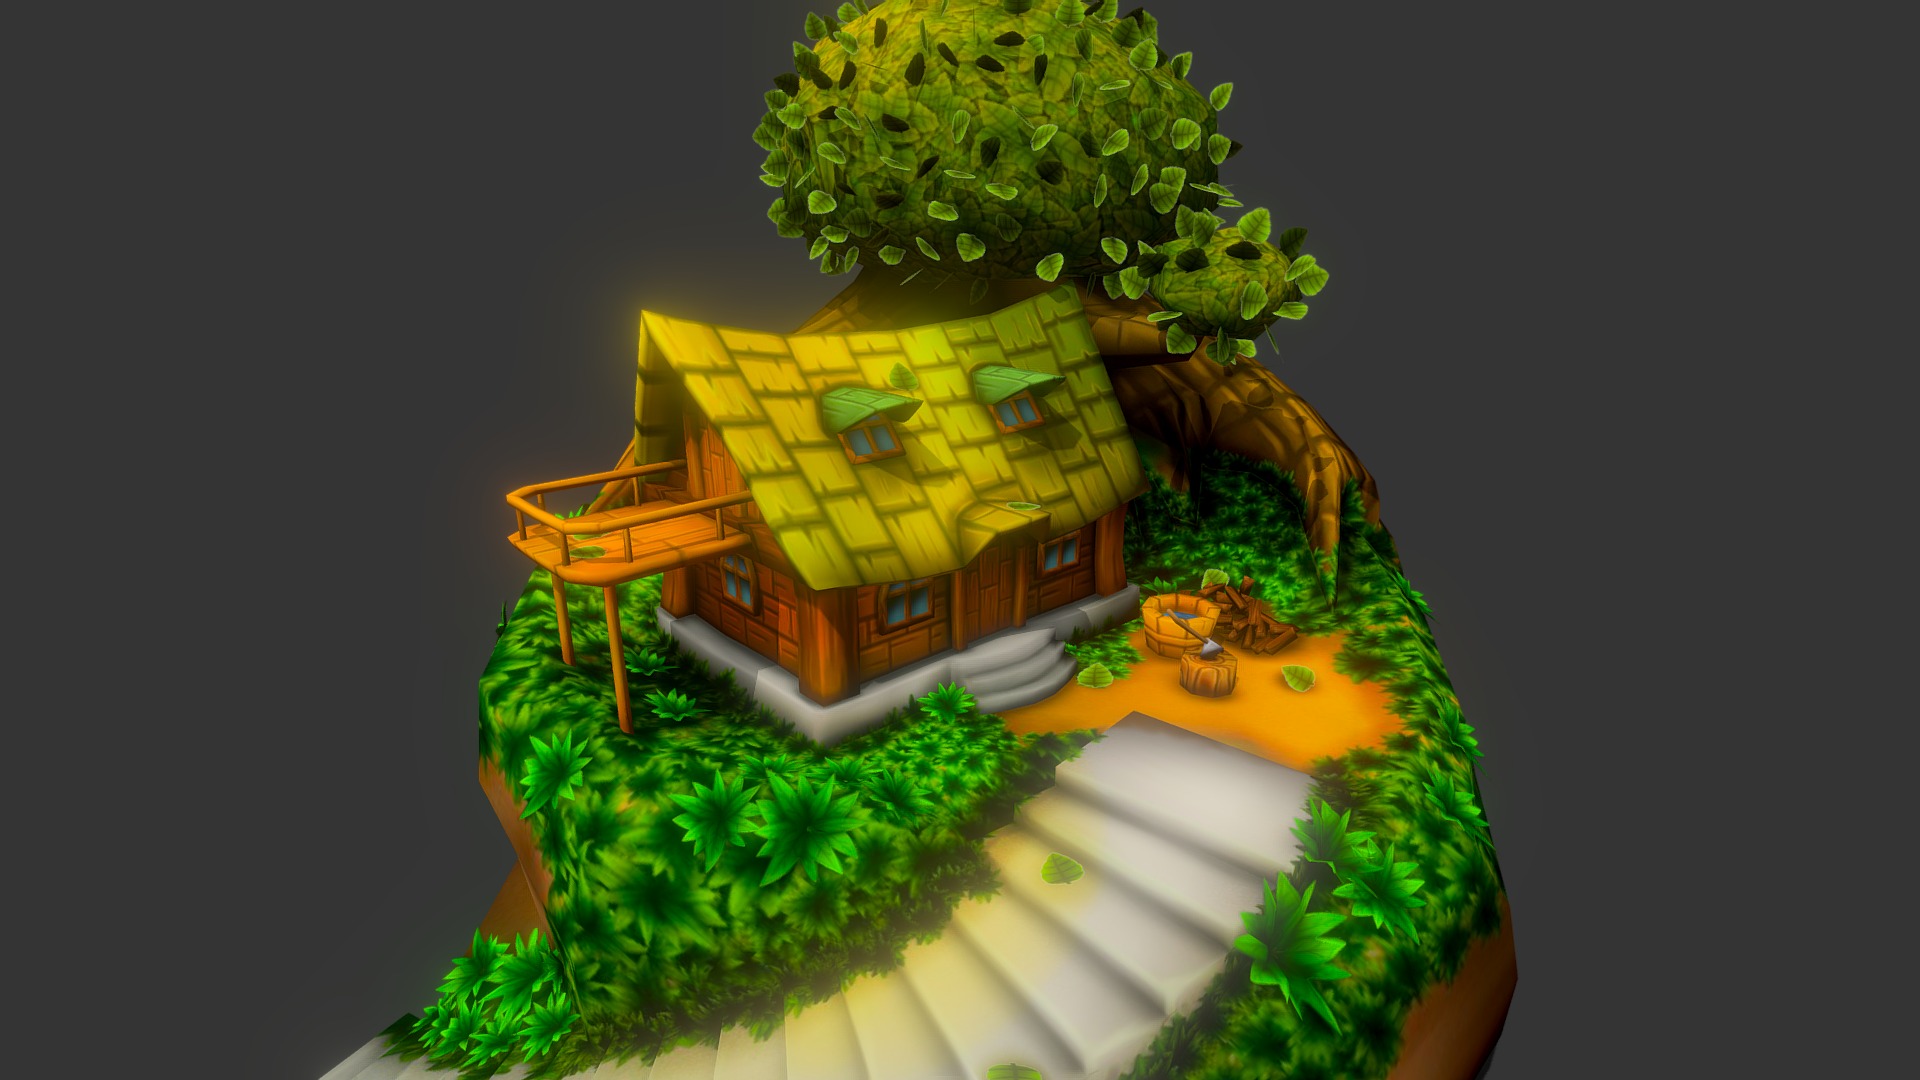 3D model Tree House Lowpoly Hand Painting - This is a 3D model of the Tree House Lowpoly Hand Painting. The 3D model is about a house made of trees.